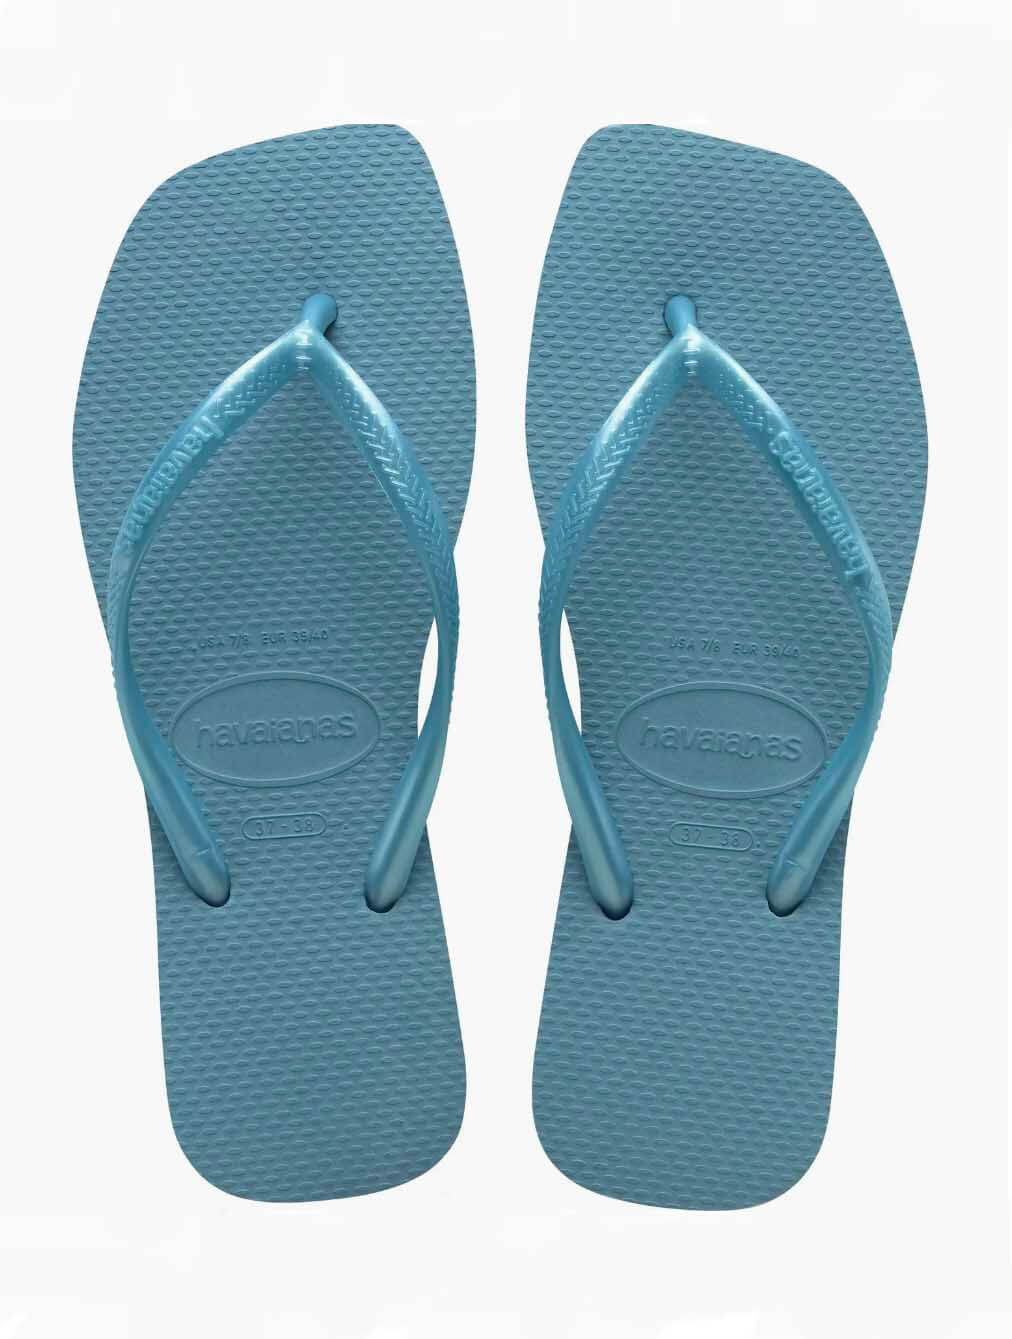 Havaianas Slim Square Toe Flip Flop in Tranquility Blue